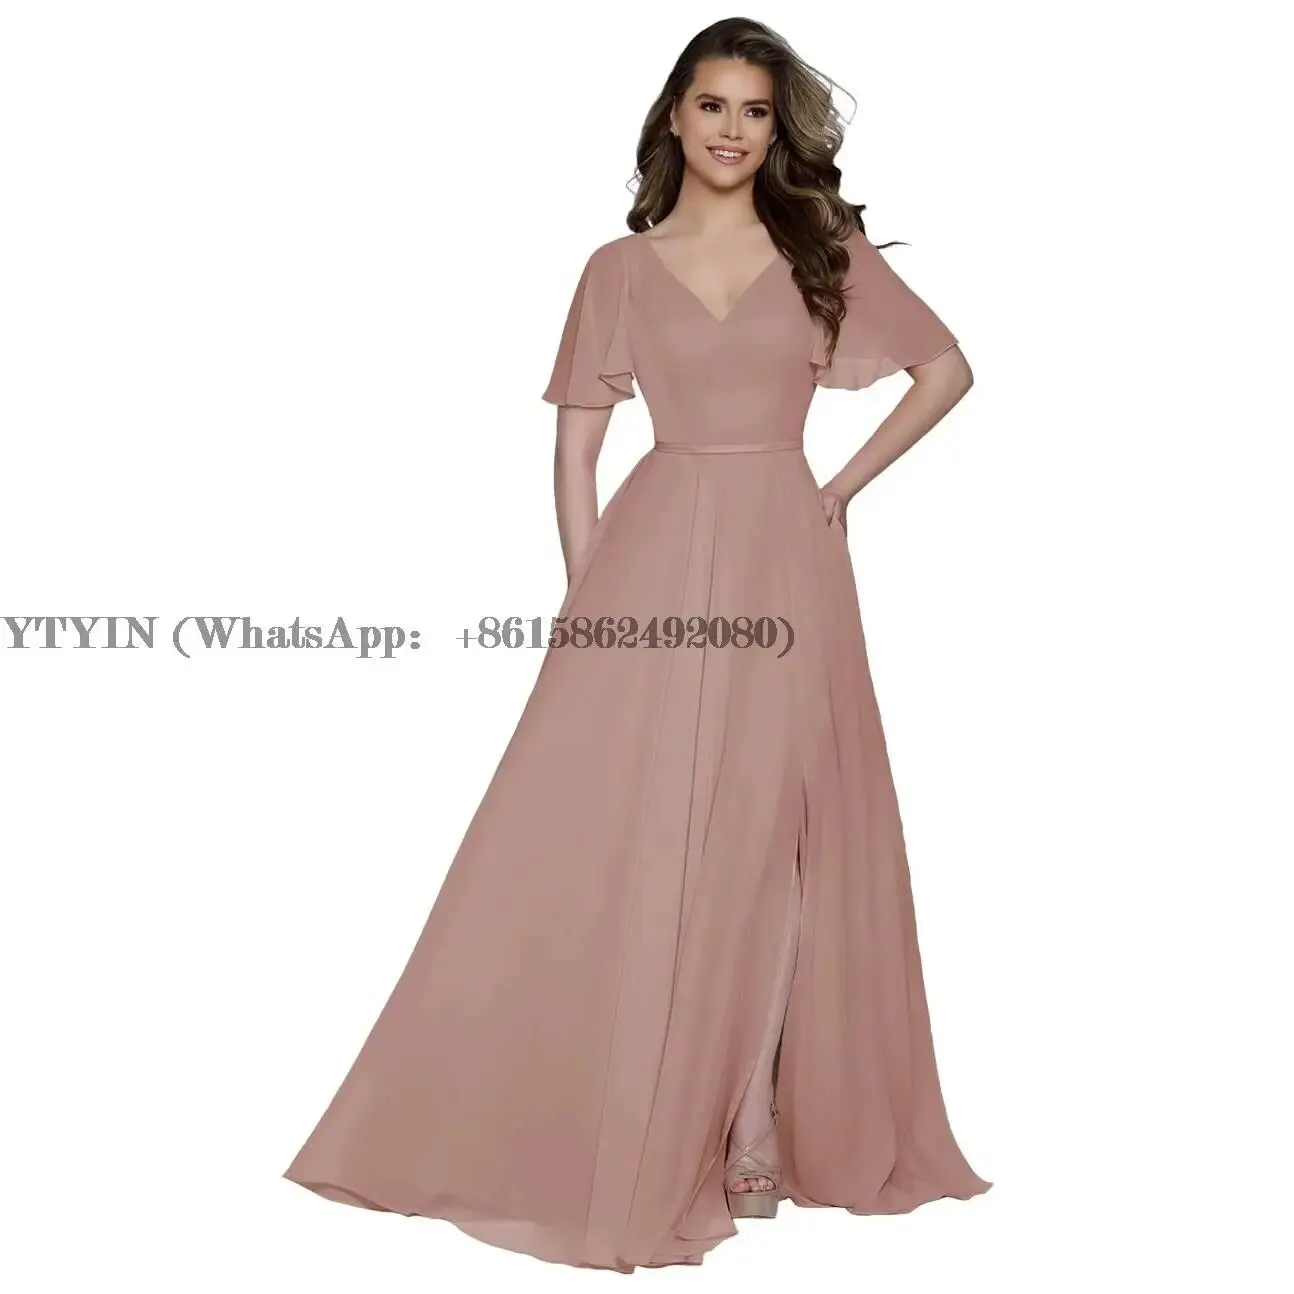 

V Neck Bridesmaid Dresses Chiffon A Line Evening Dresses Wedding Guest Dresses with Slit and Sleeve for Women